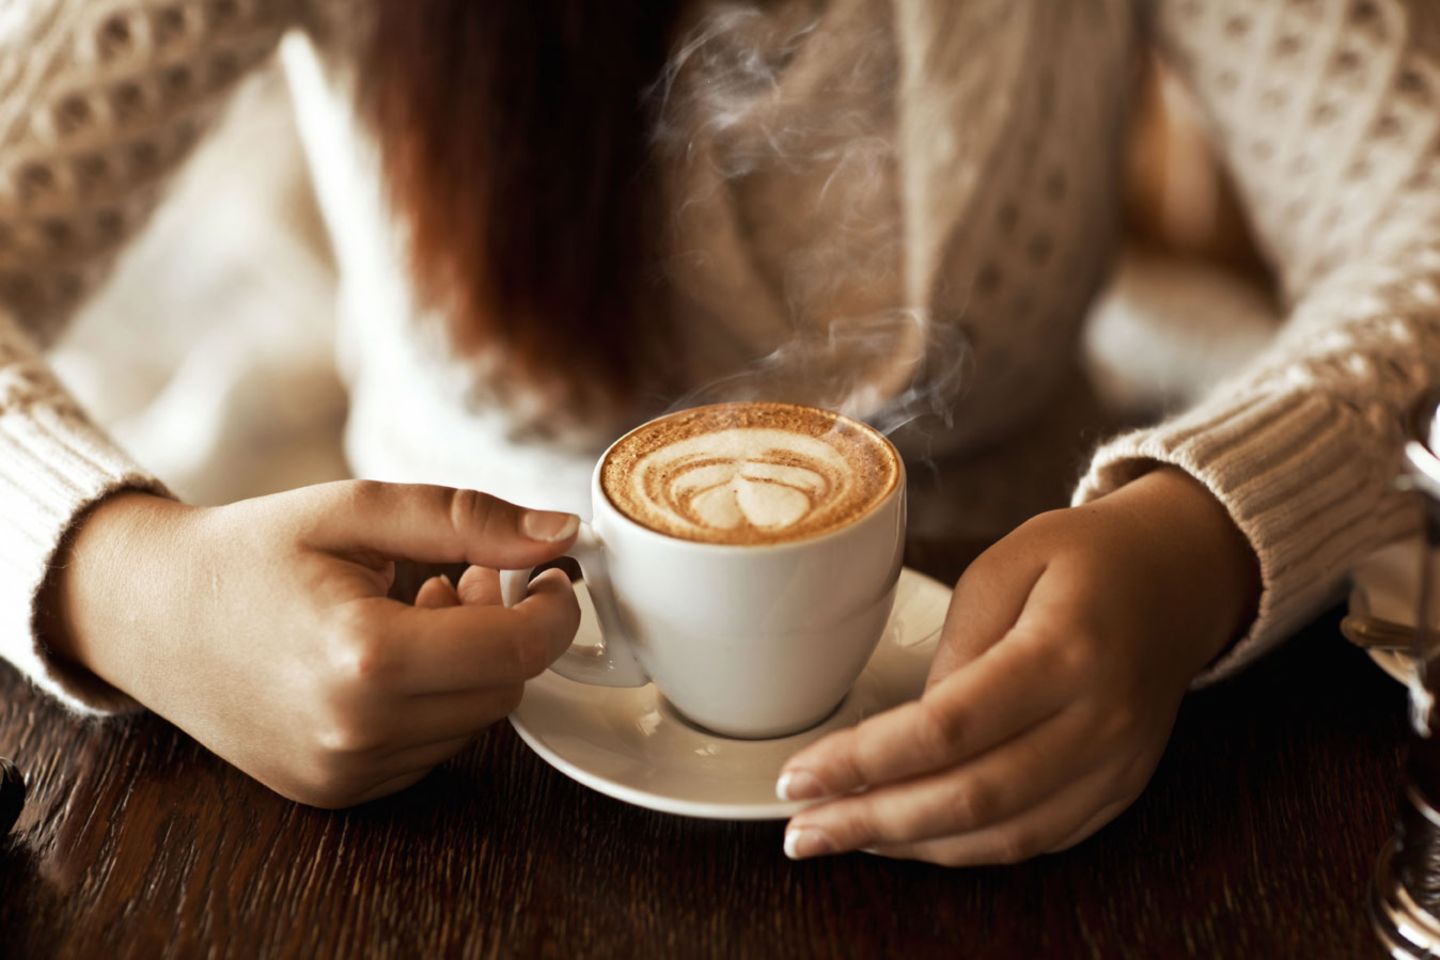 It’s Time to Find Out If You’re More Logical or Emotional With This “This or That” Game Coffee date